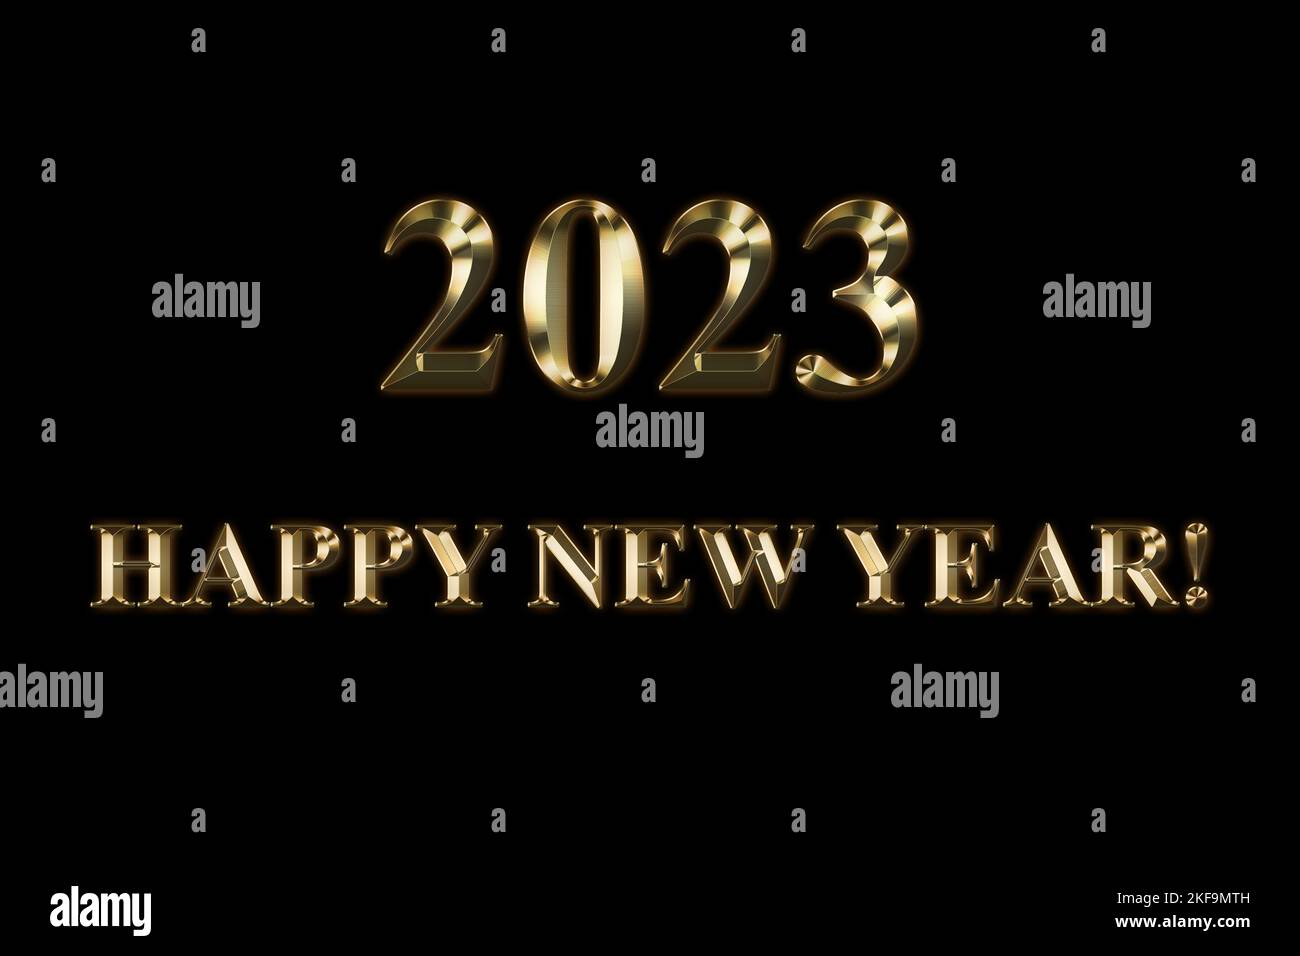 2023 Happy New Year, font isolated on black background. Gold text design. Dark greeting card, illustration with golden numbers and words. Congratulati Stock Photo